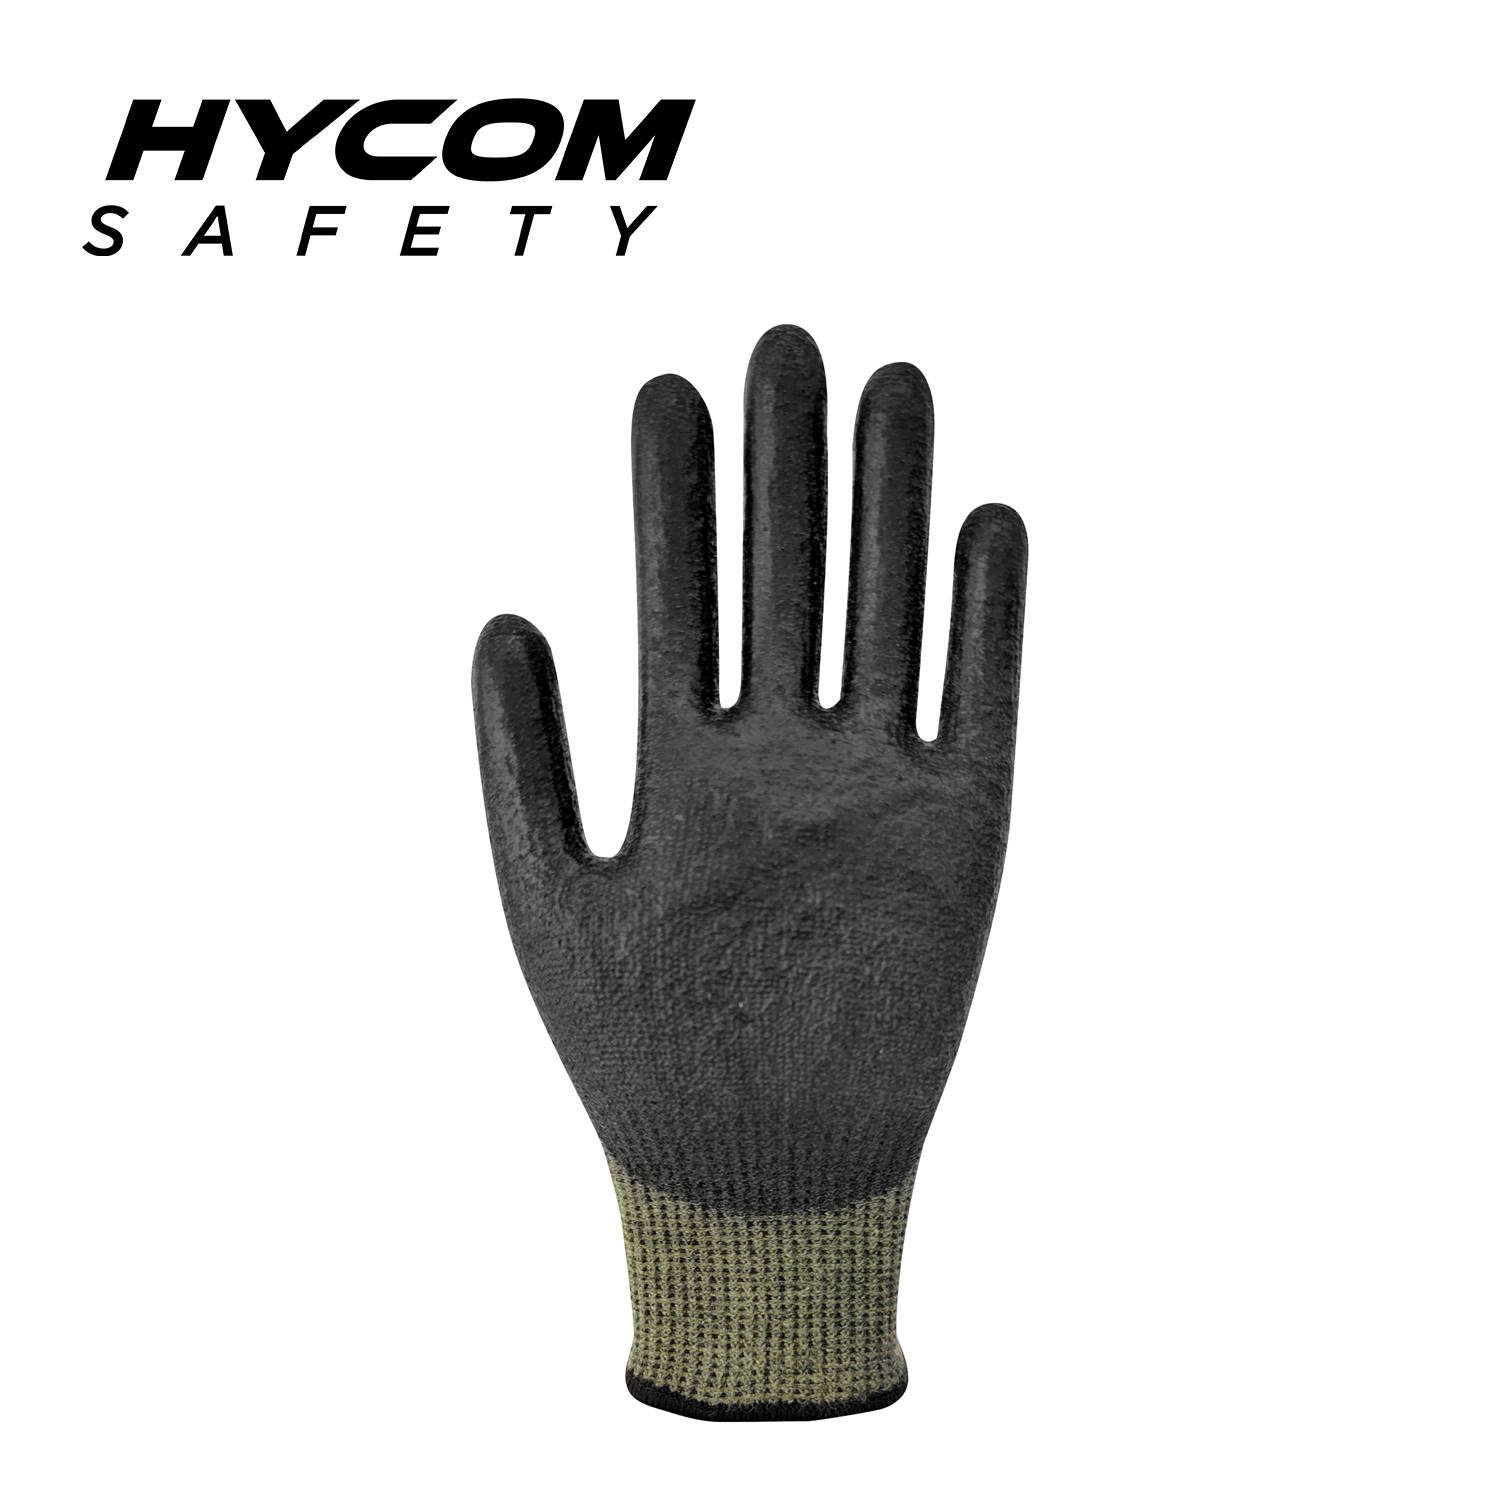 HYCOM 13G ANSI 9 Cut Resistant Glove Coated with Palm PU Aramid PPE Gloves